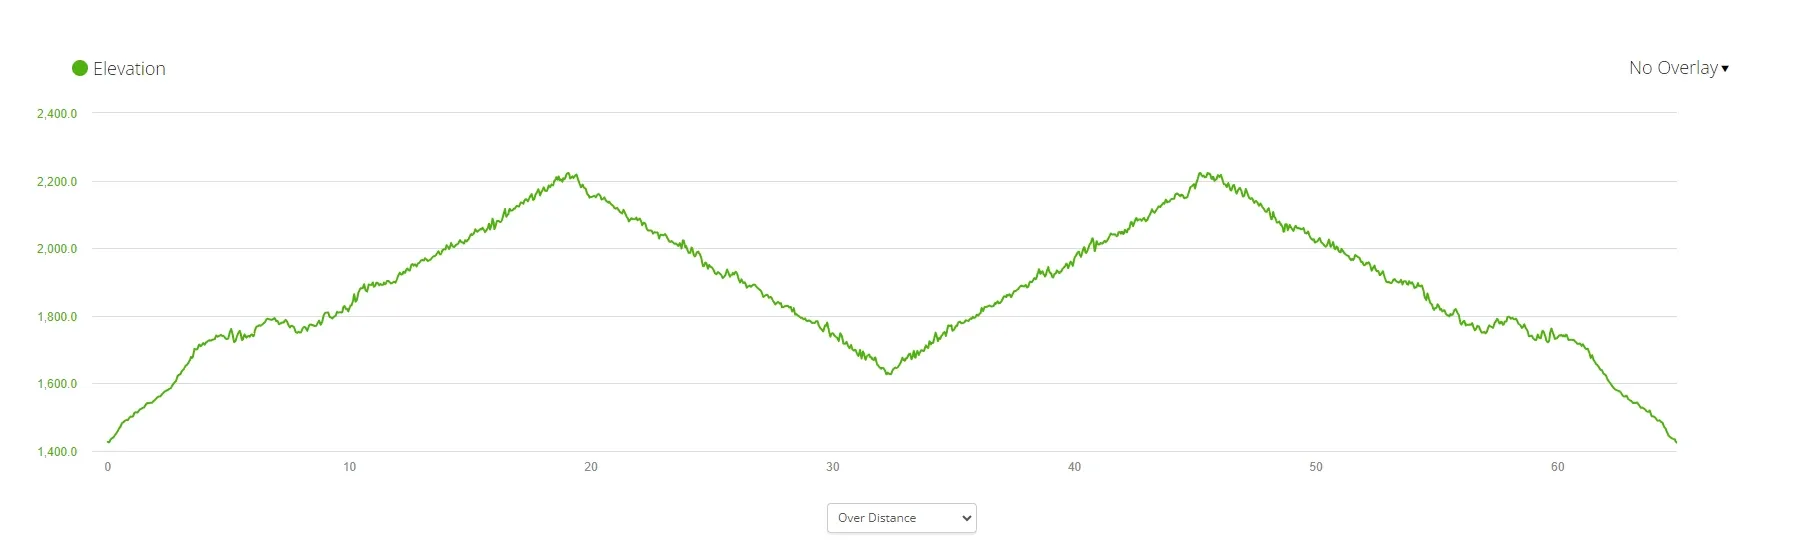 Elevation Chart distance wise